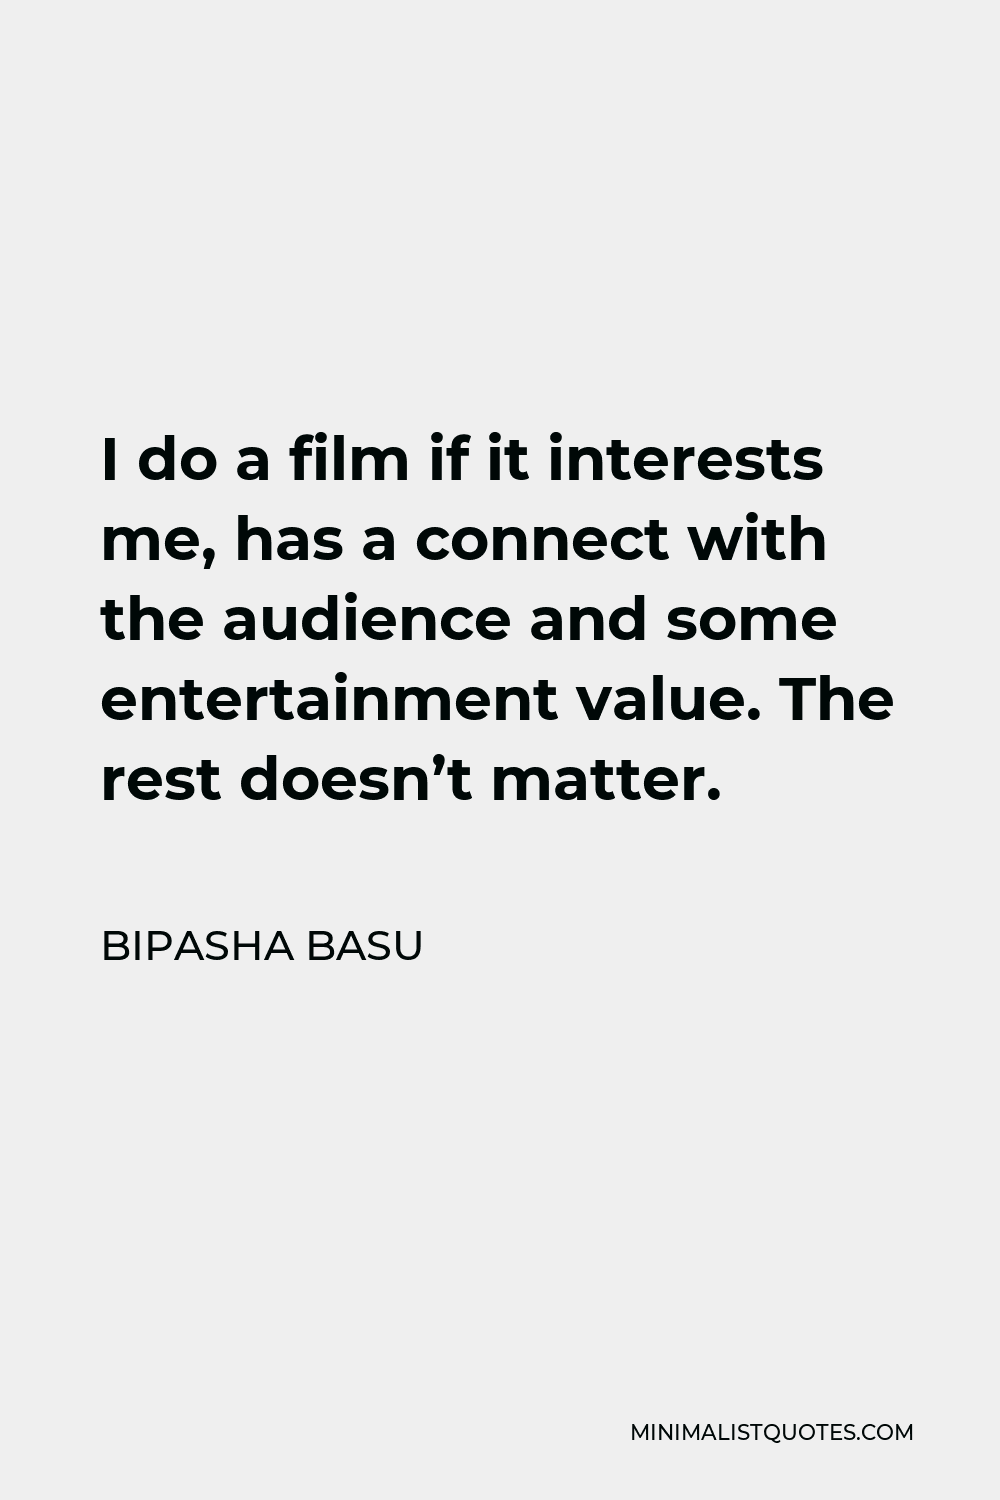 Bipasha Basu Quote - I do a film if it interests me, has a connect with the audience and some entertainment value. The rest doesn’t matter.